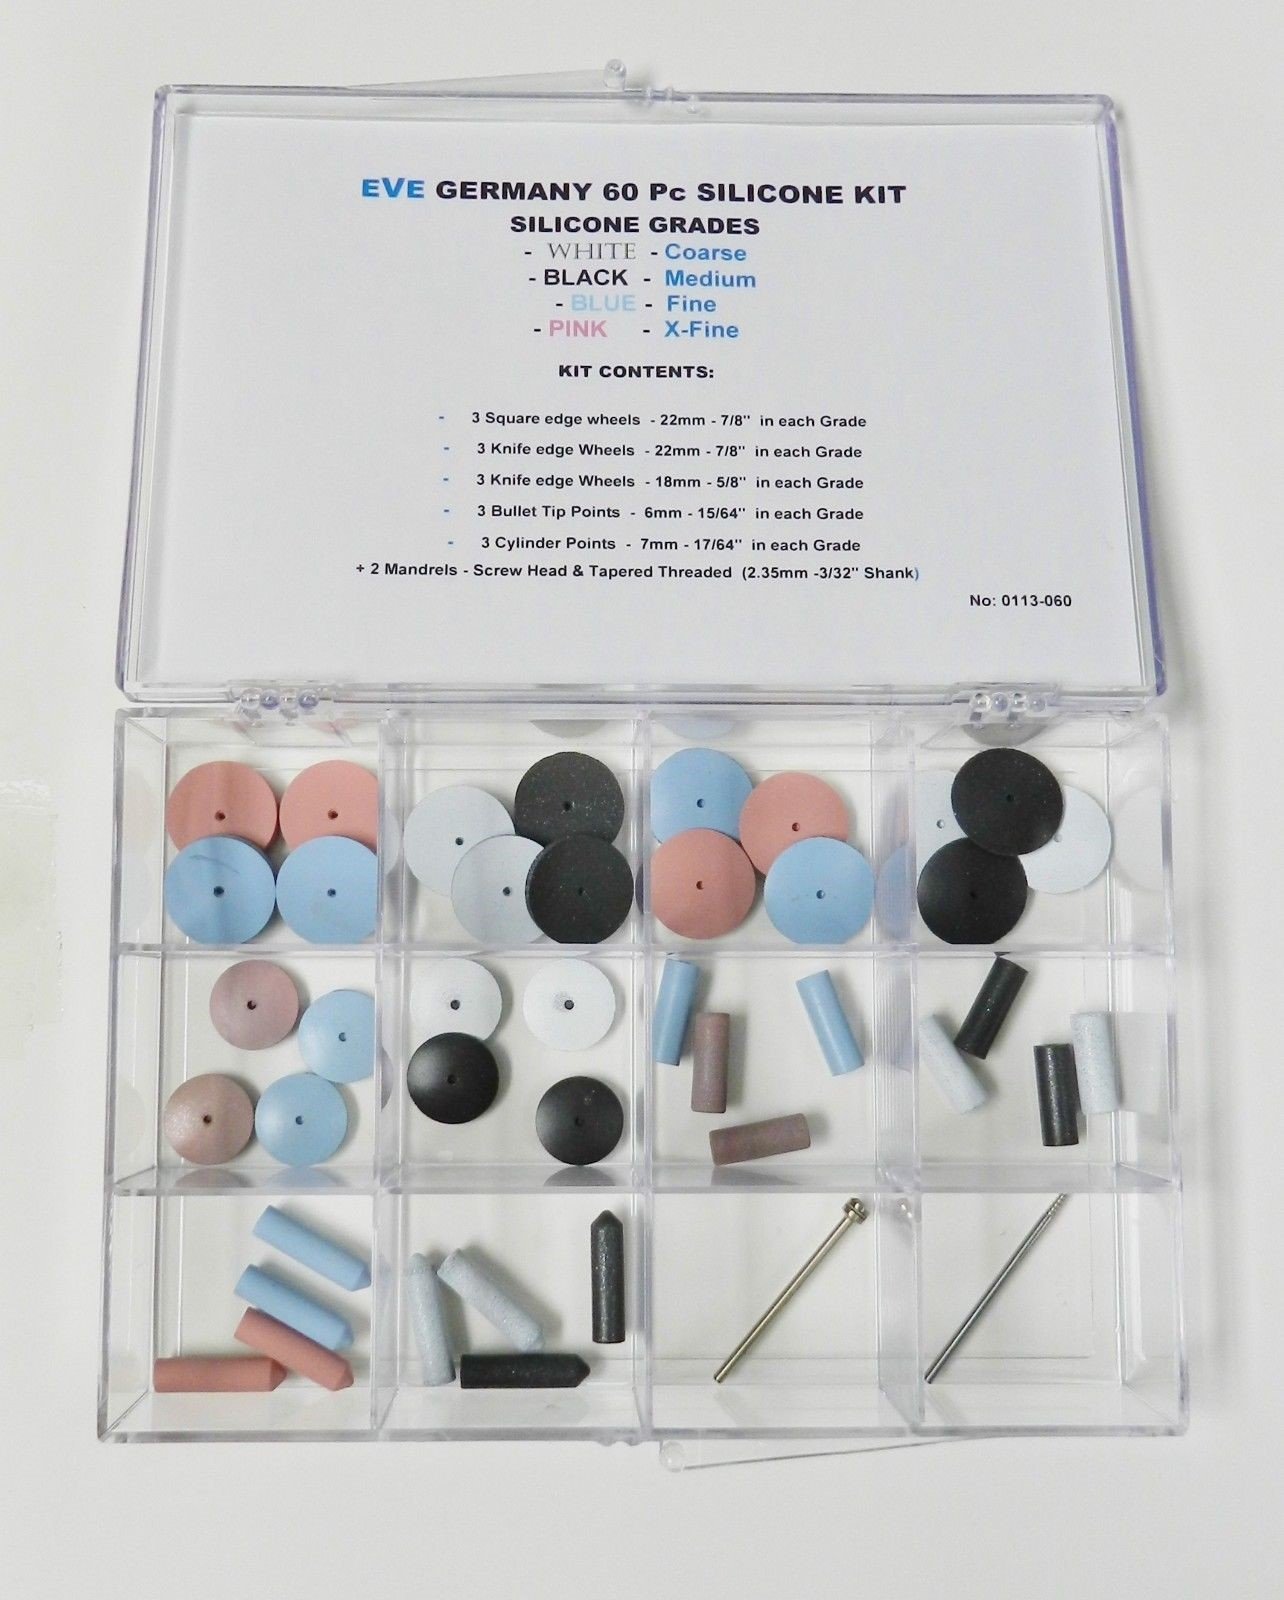 SILICON SOFTEE STARTER KIT, Contains 60 of our most popular unmounted styles and 2 mandrels in a handy clear box.EVE-GERMANY